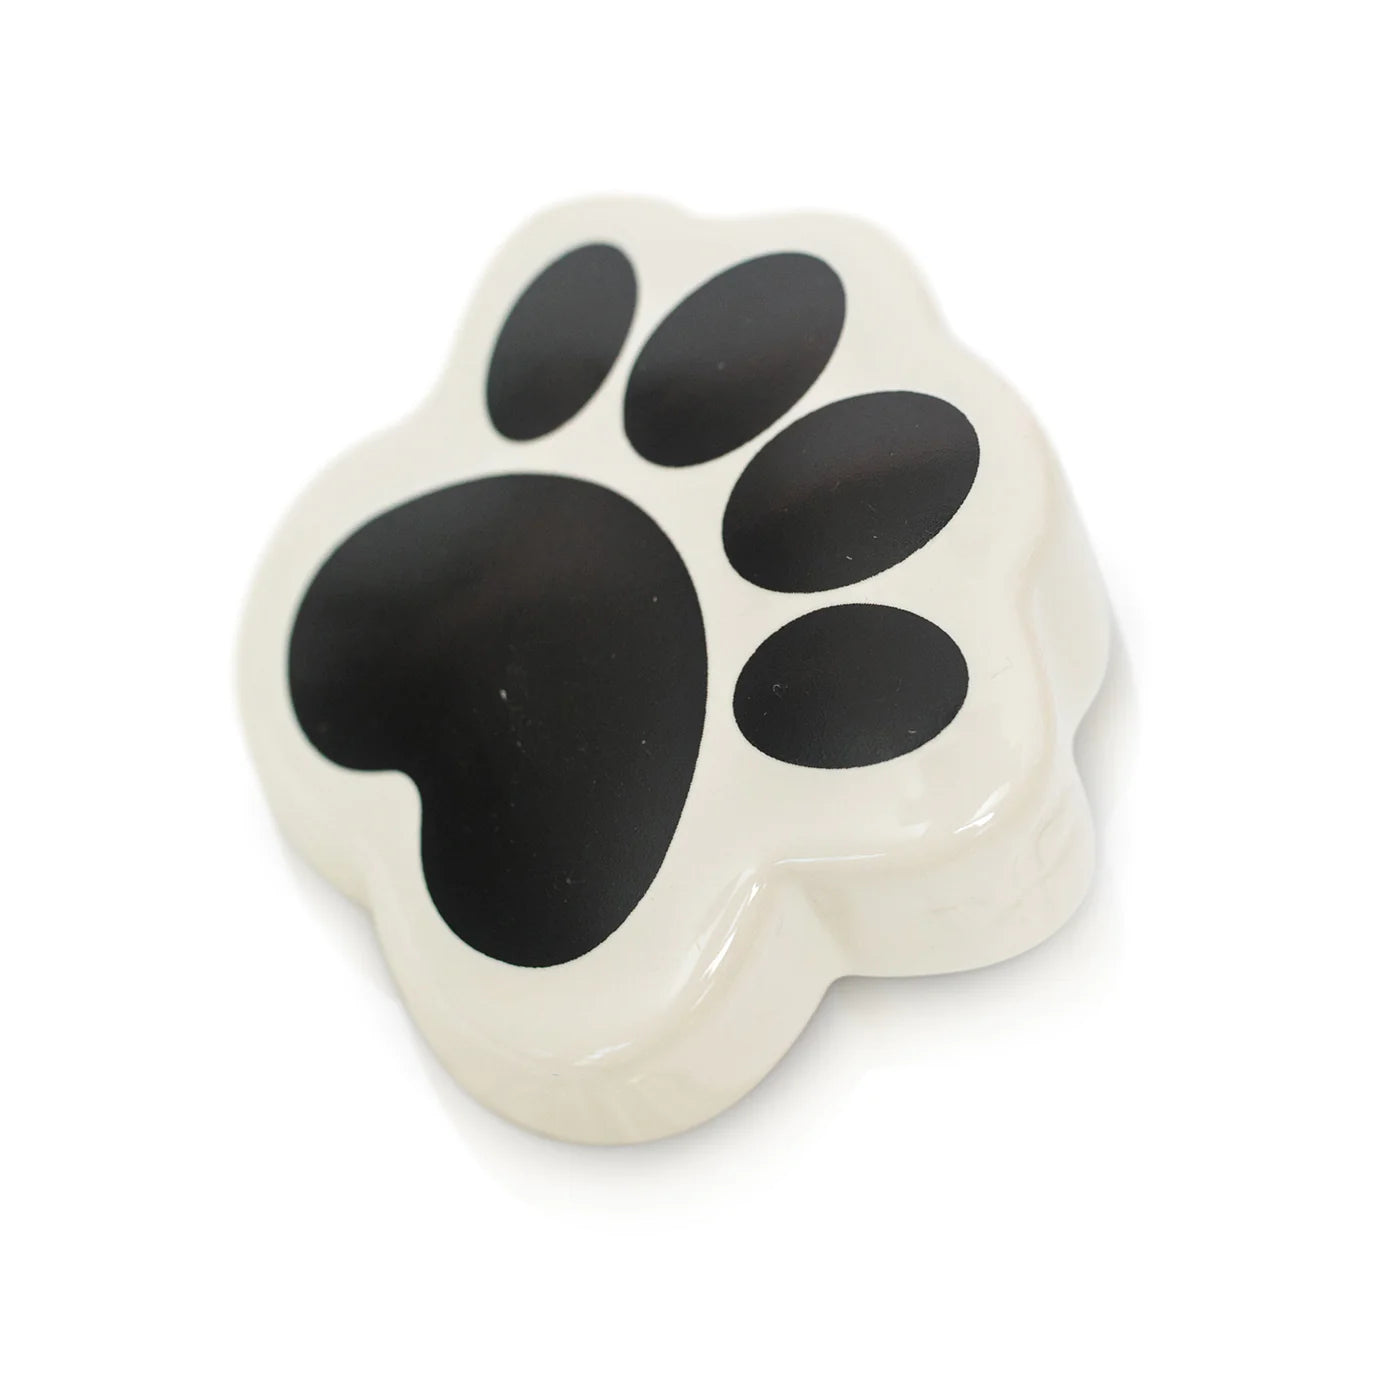 New Nora Fleming "It's Paw-ty time!" Paw Print Mini